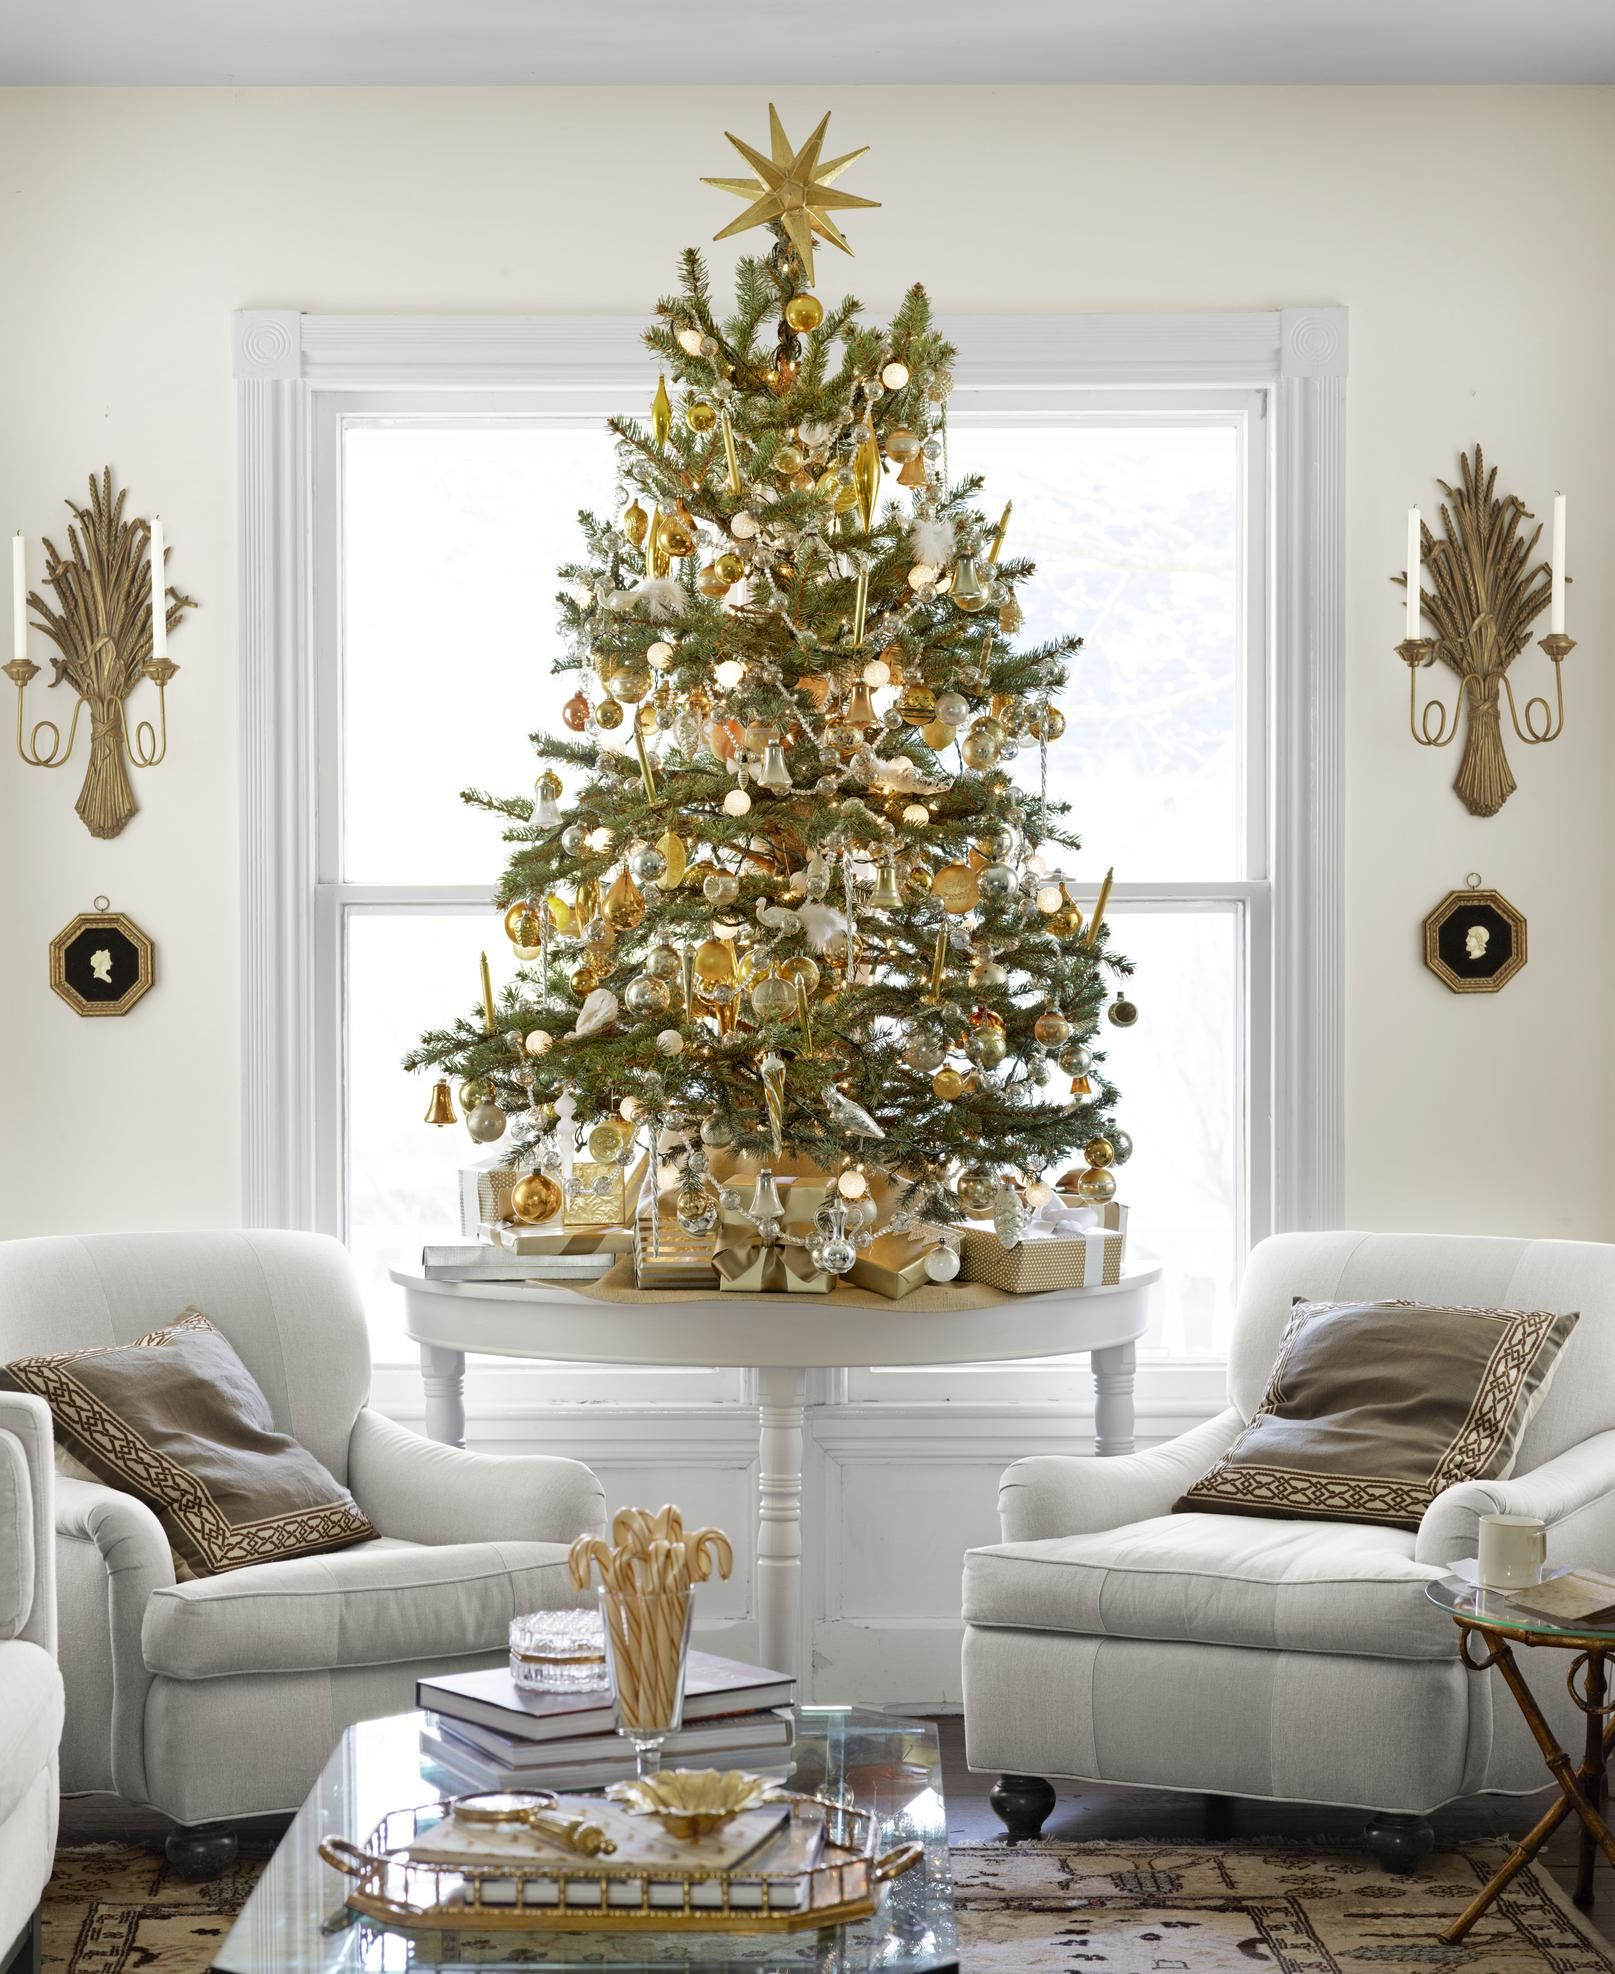 10 Christmas Decorating Ideas For Your